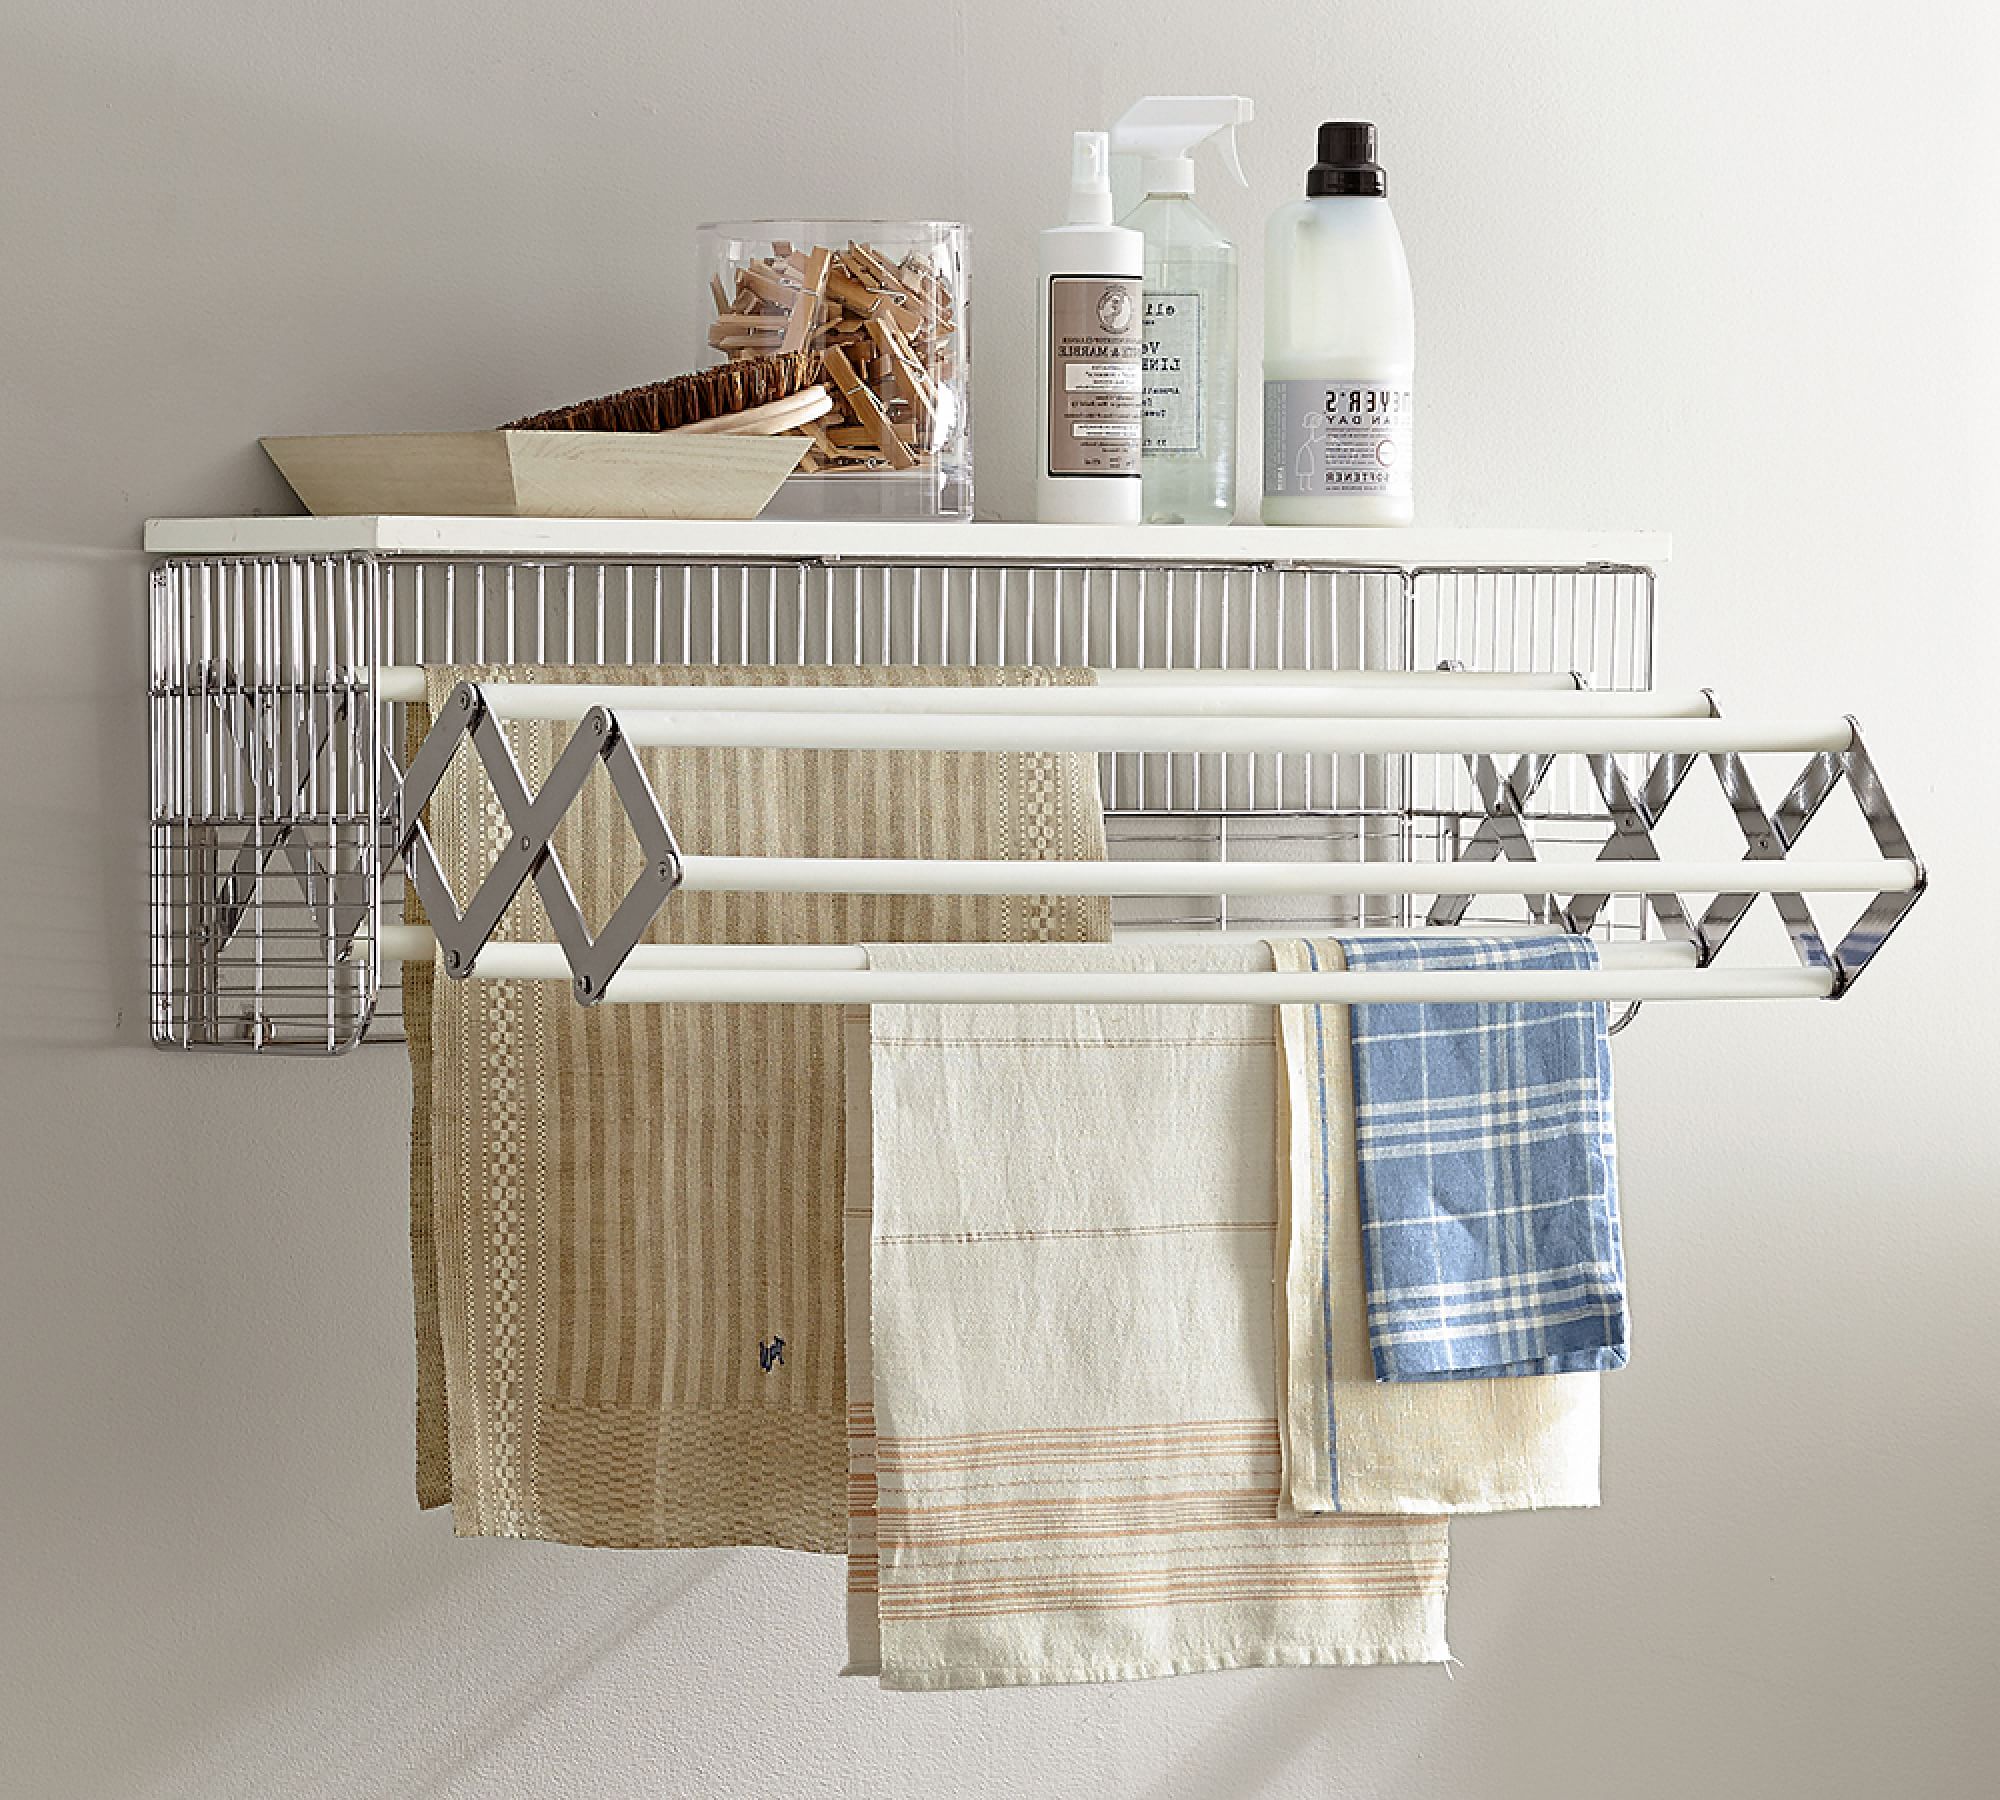 Wall Mounted Clothes Drying Rack - Heavy Duty (Made in USA) - Large